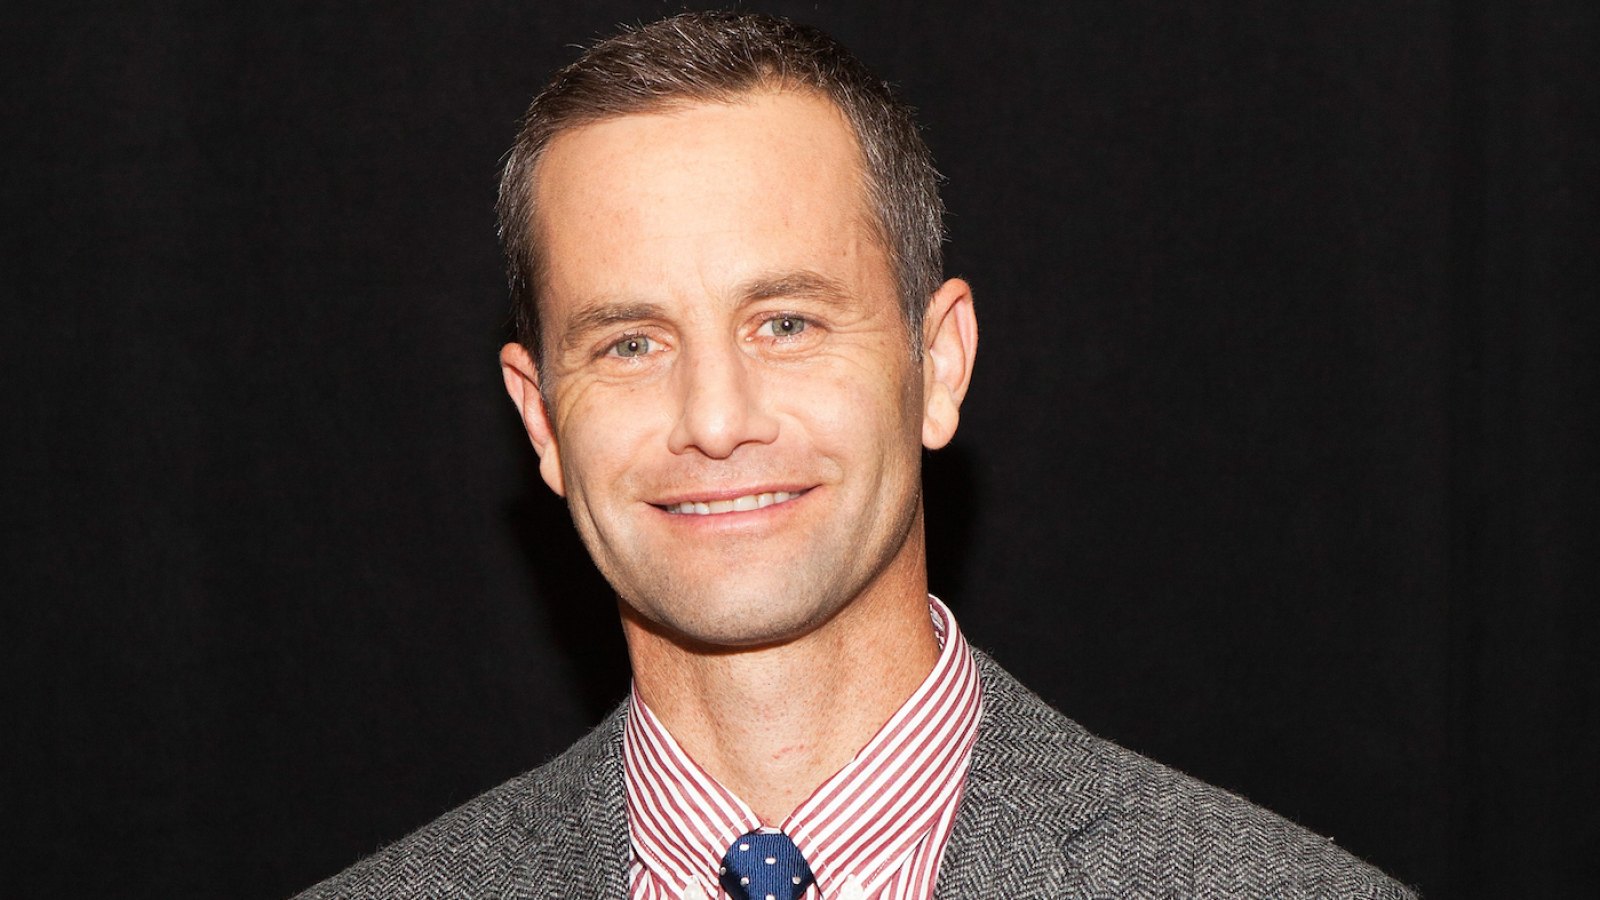 Kirk Cameron Criticized for Controversial Hurricane Irma Comments